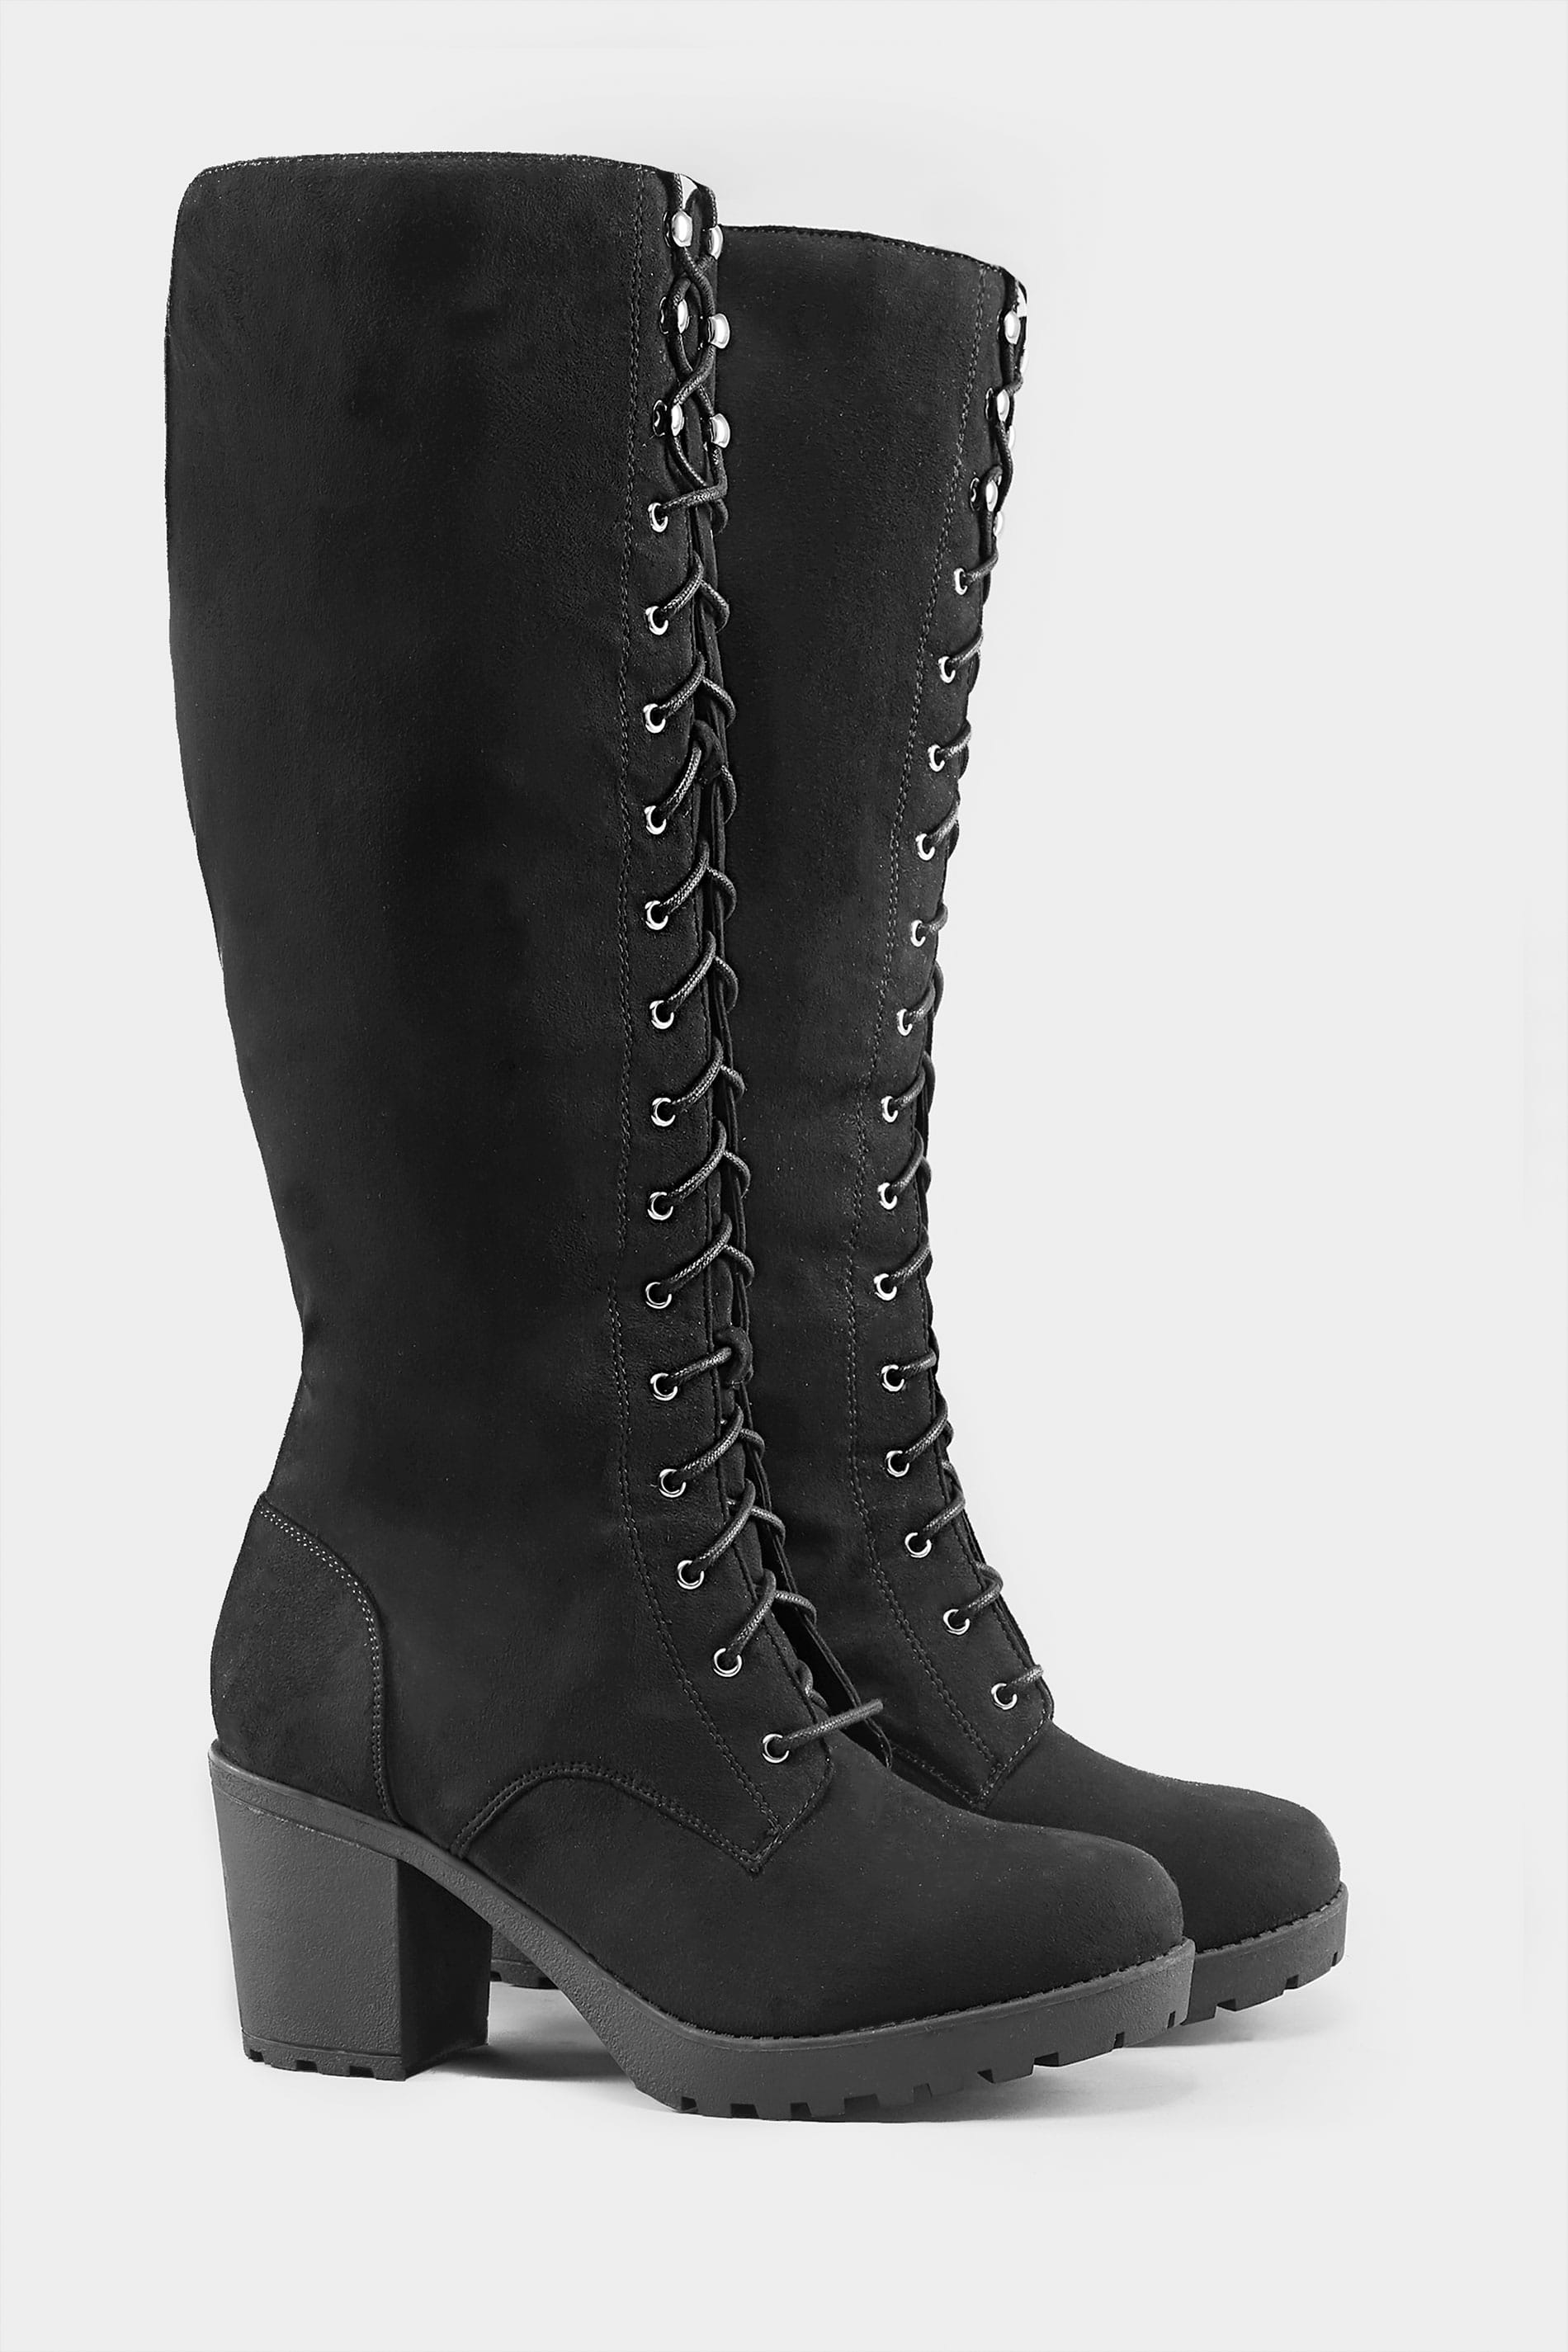 Black Lace Up Heeled Knee High Boots In 